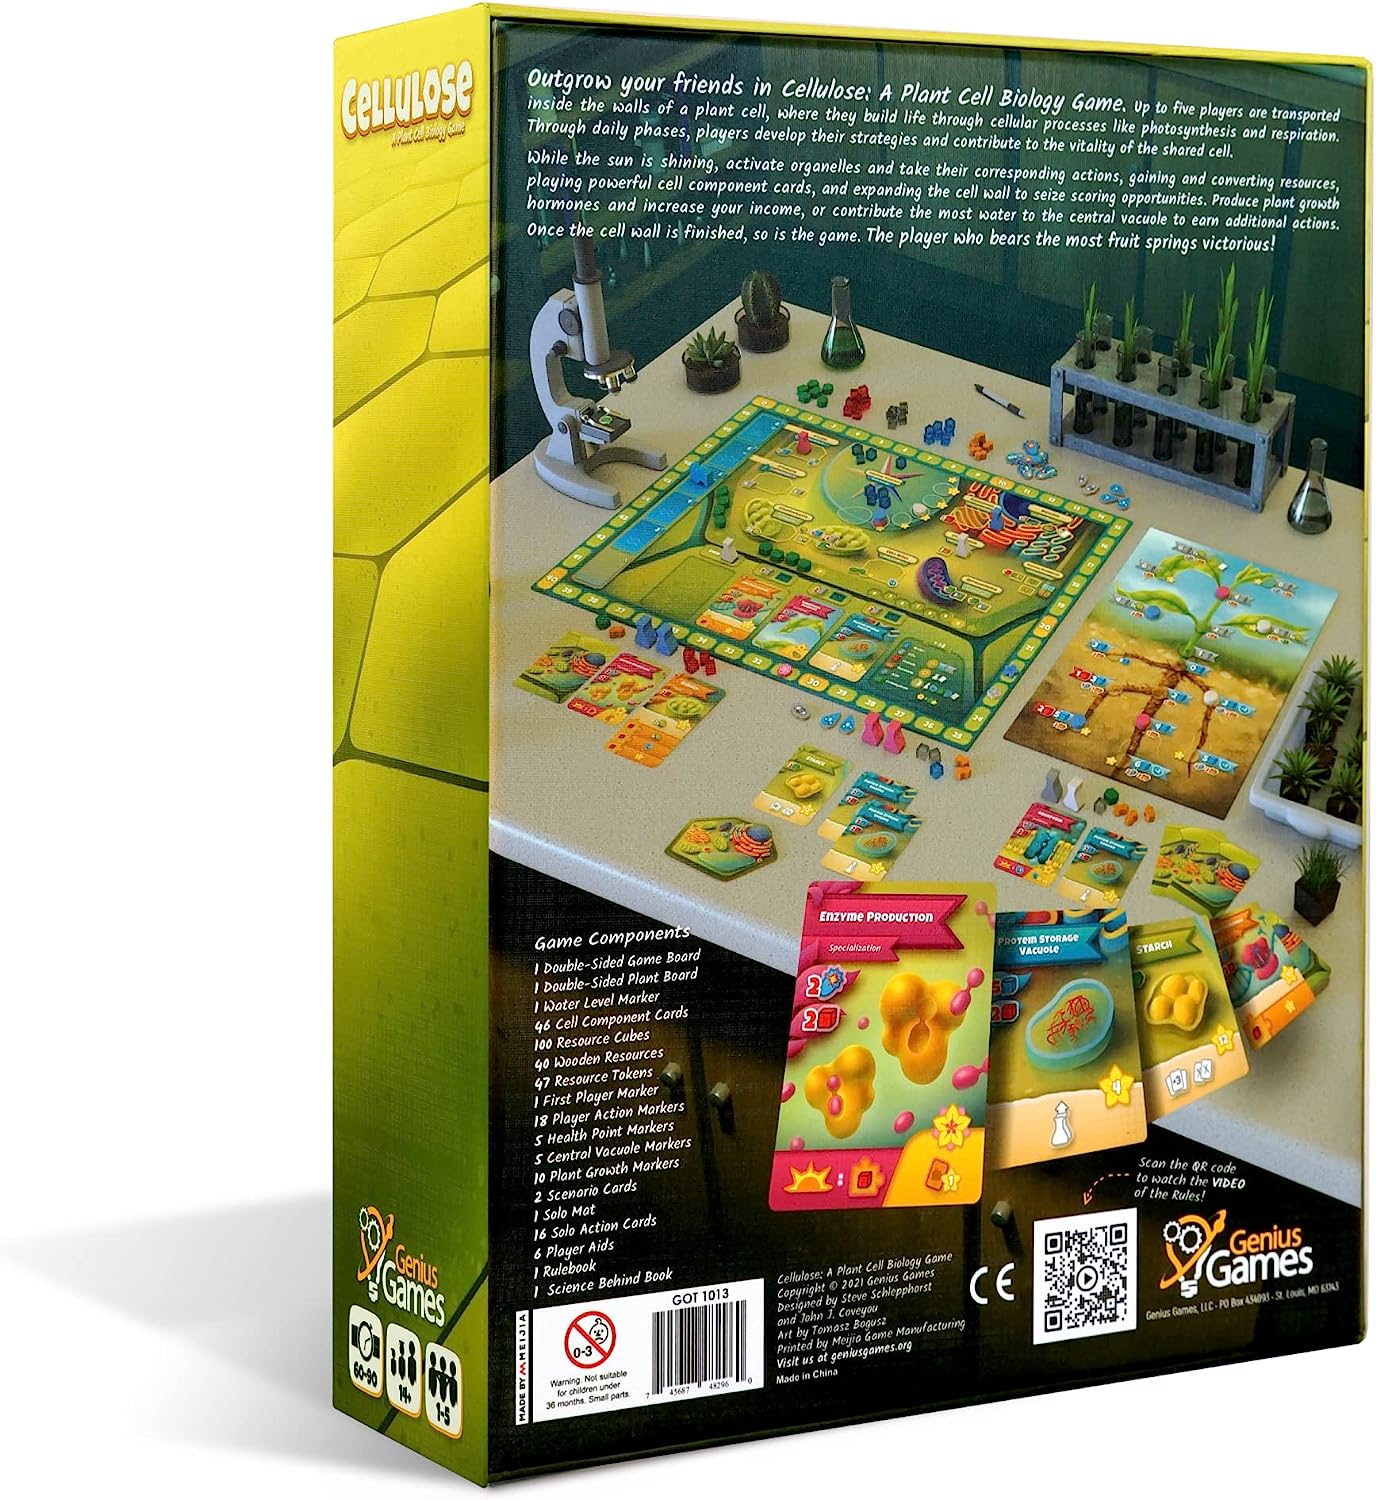 Collector's Edition Cellulose: A Plant Cell Biology Game | A Strategy Board Game with Accurate Science | Perfect for STEM Enthusiasts, Teachers, Students…